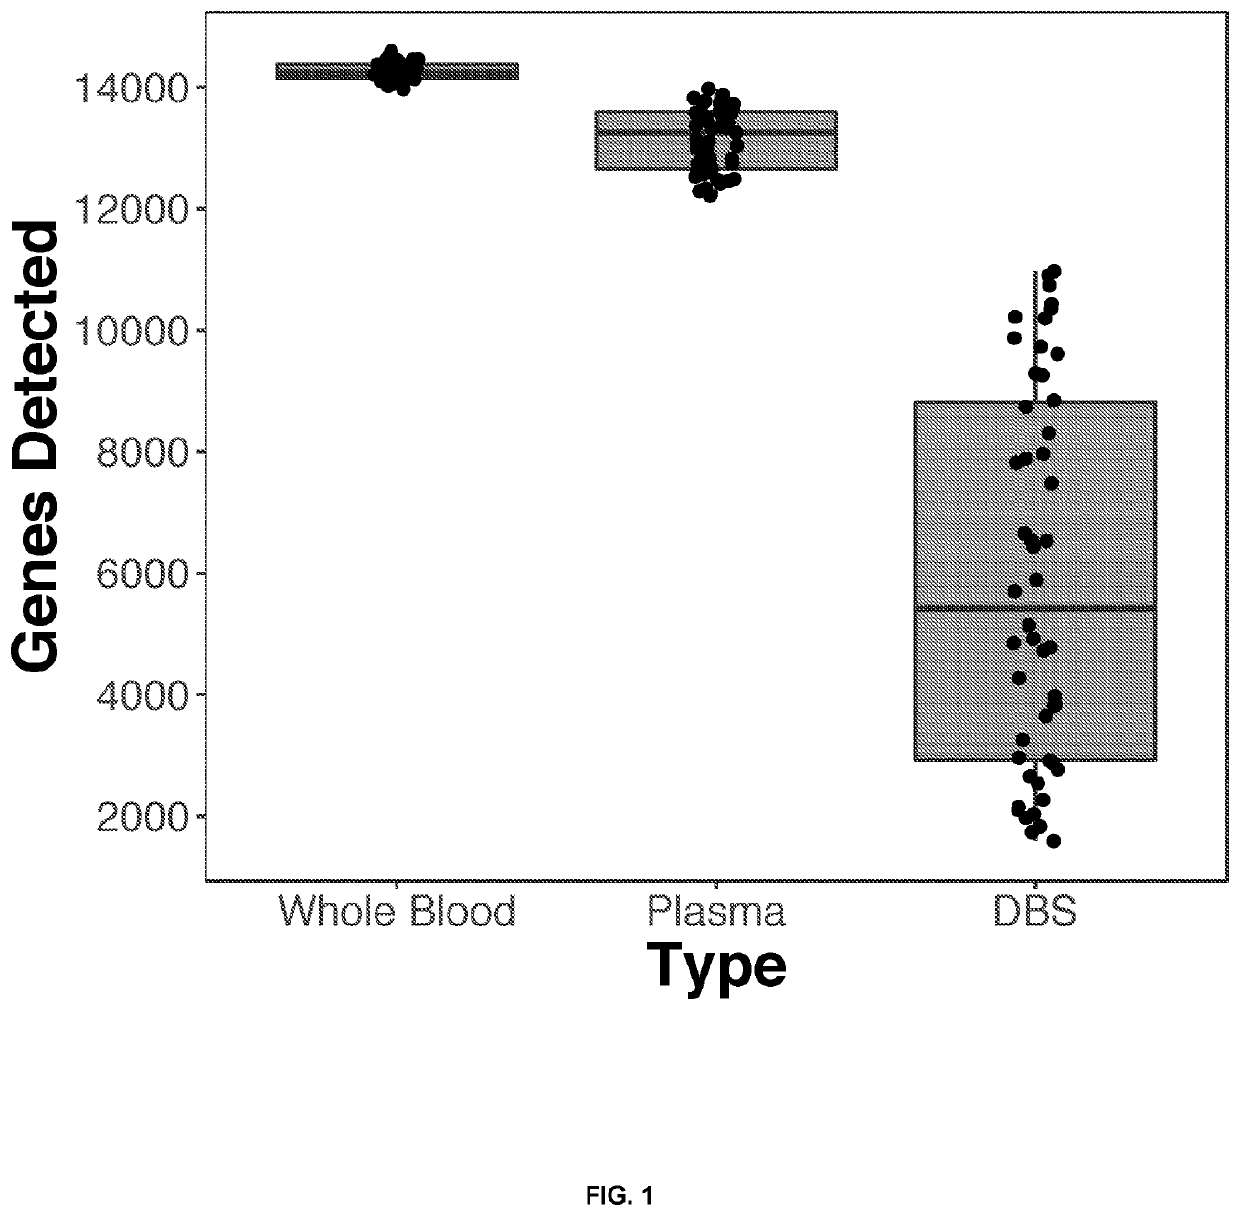 Biomarker proxy tests and methods for standard blood chemistry tests